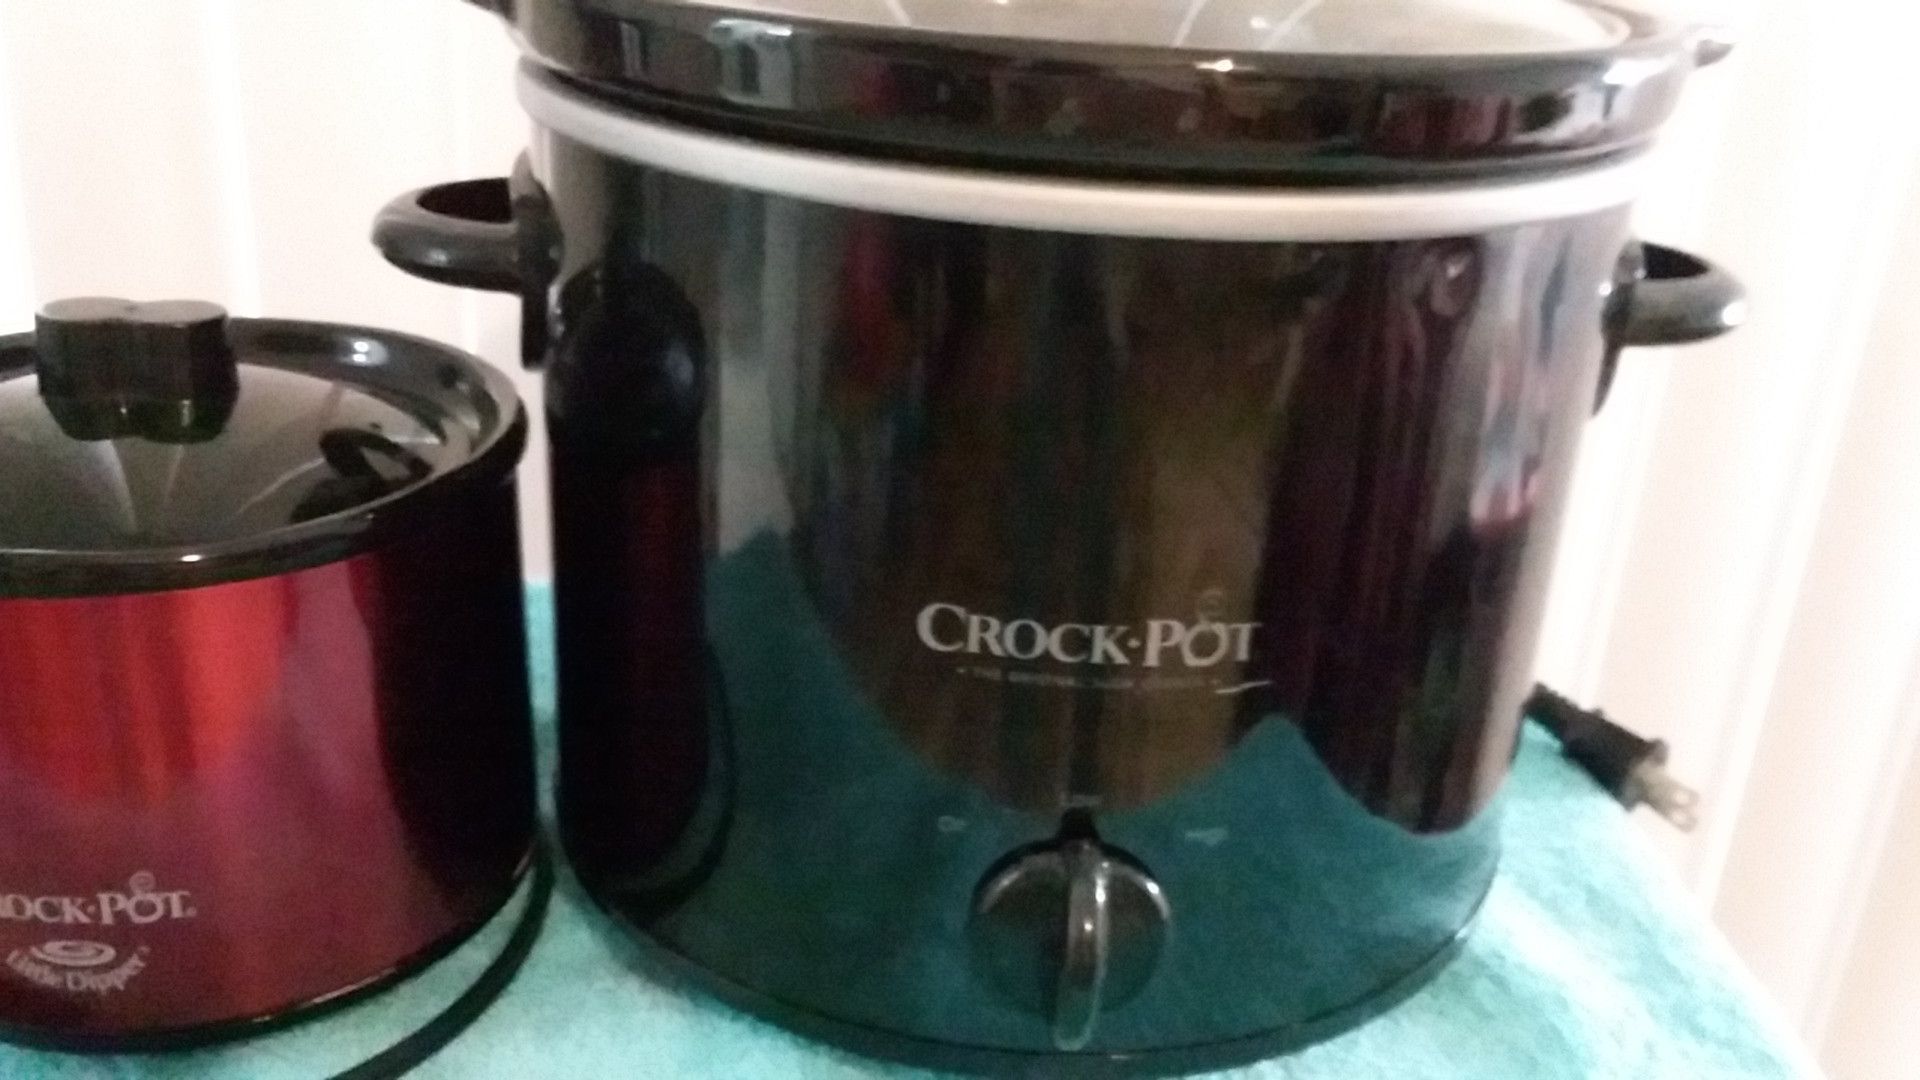 Crock pot one small red and one large black color